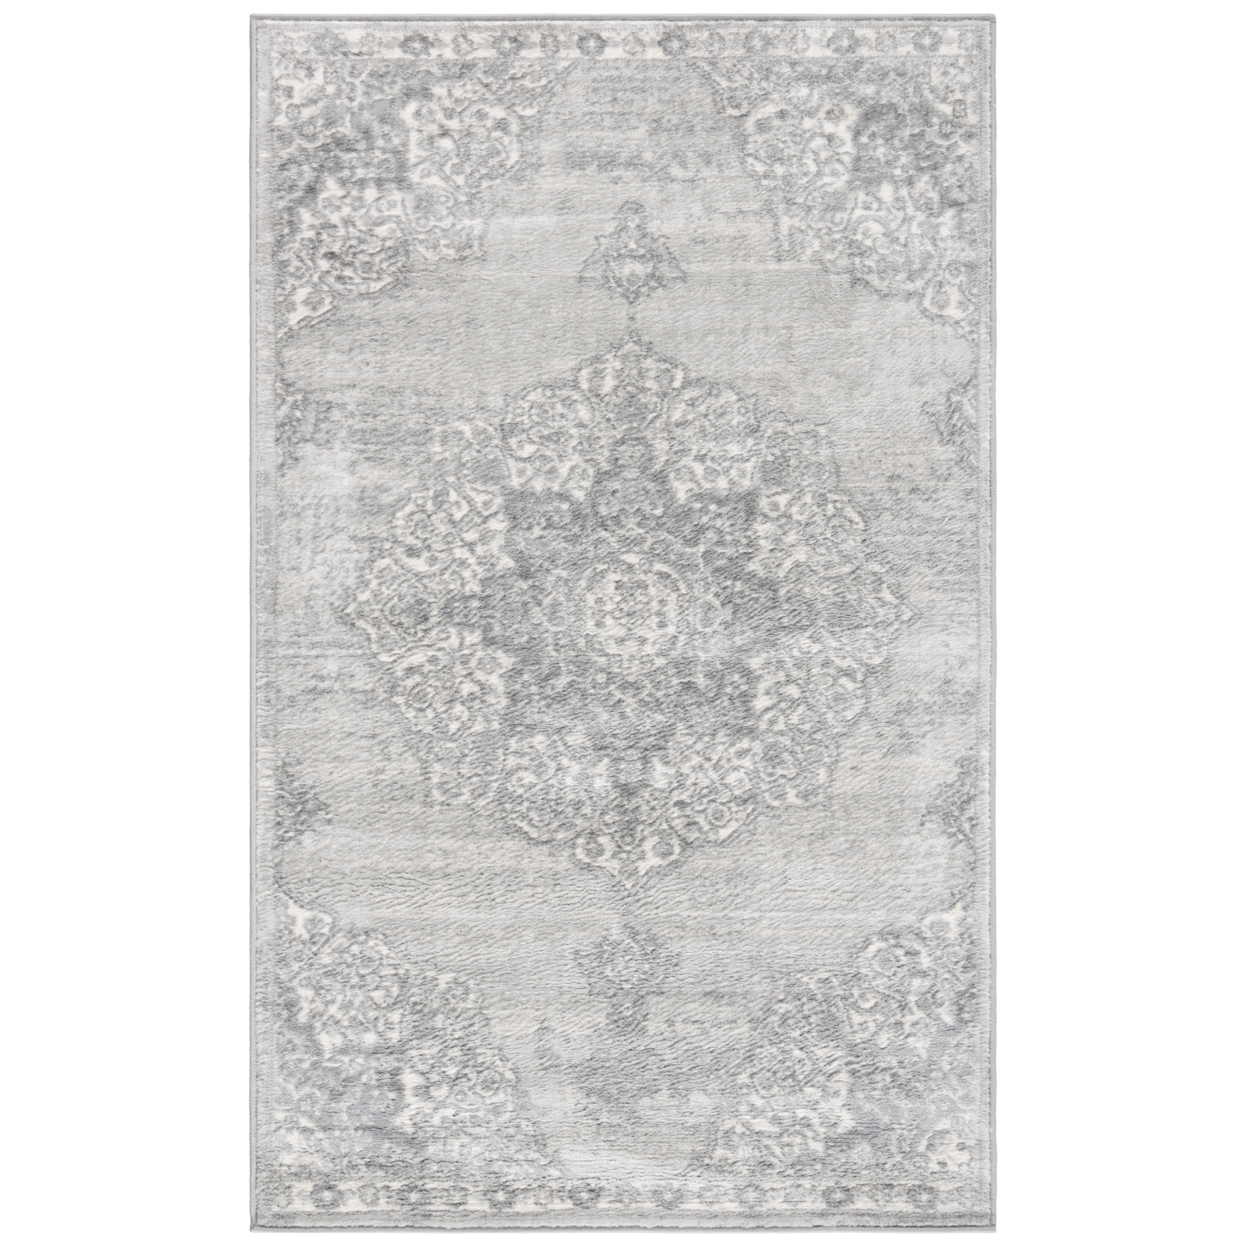 SAFAVIEH Brentwood Collection BNT802F Grey / Ivory Rug - 2' X 10'